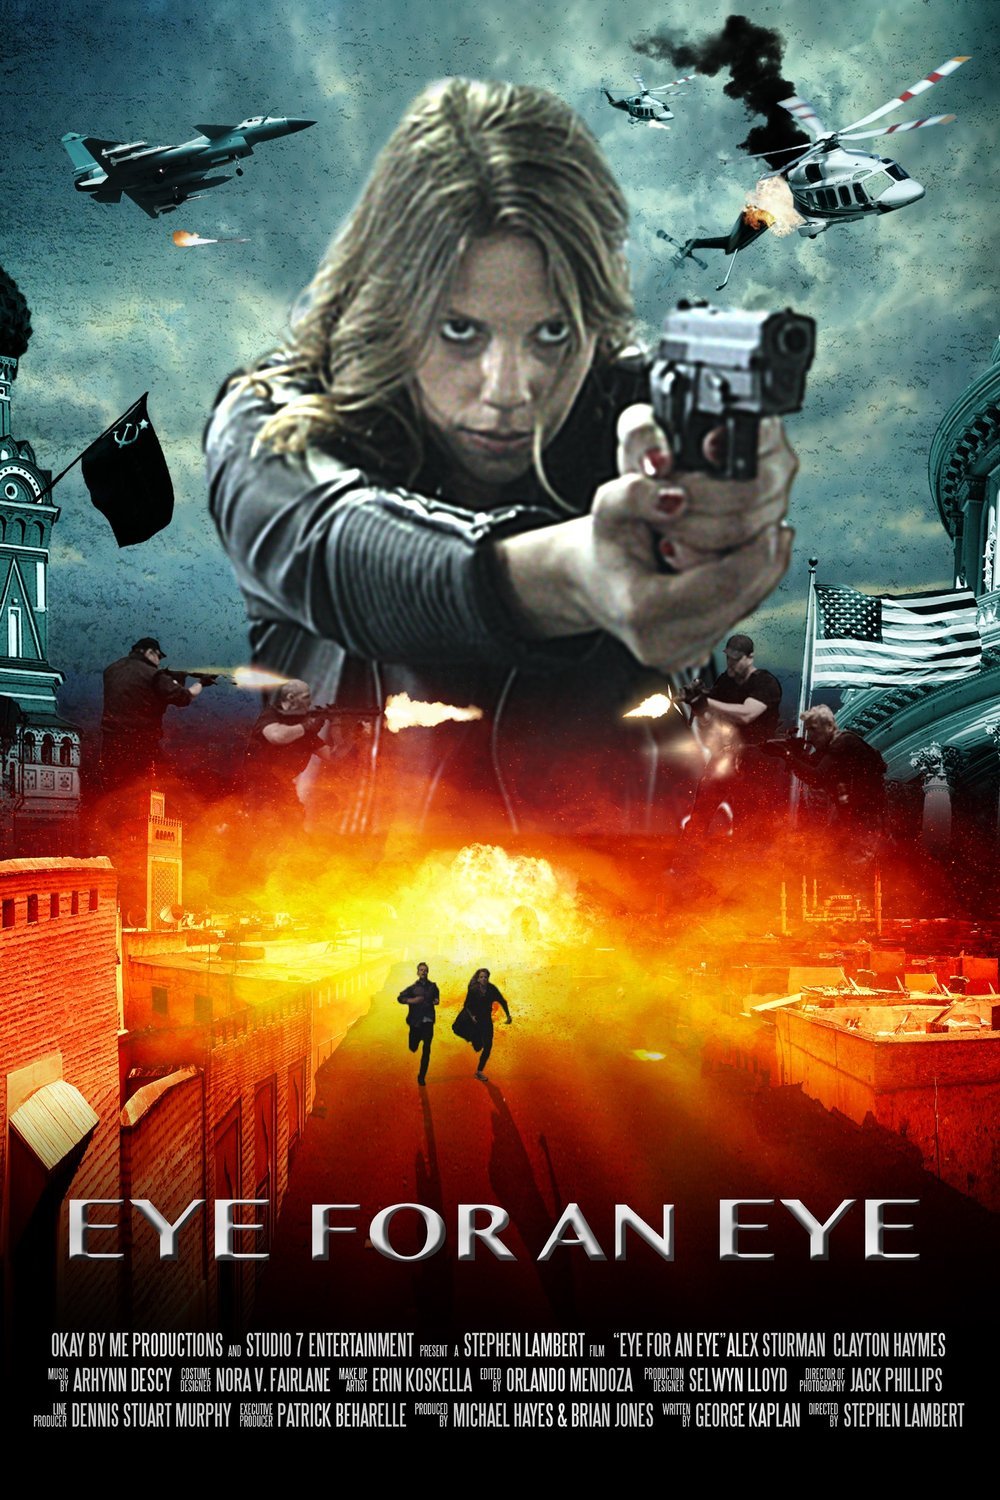 Poster of the movie Eye for an Eye